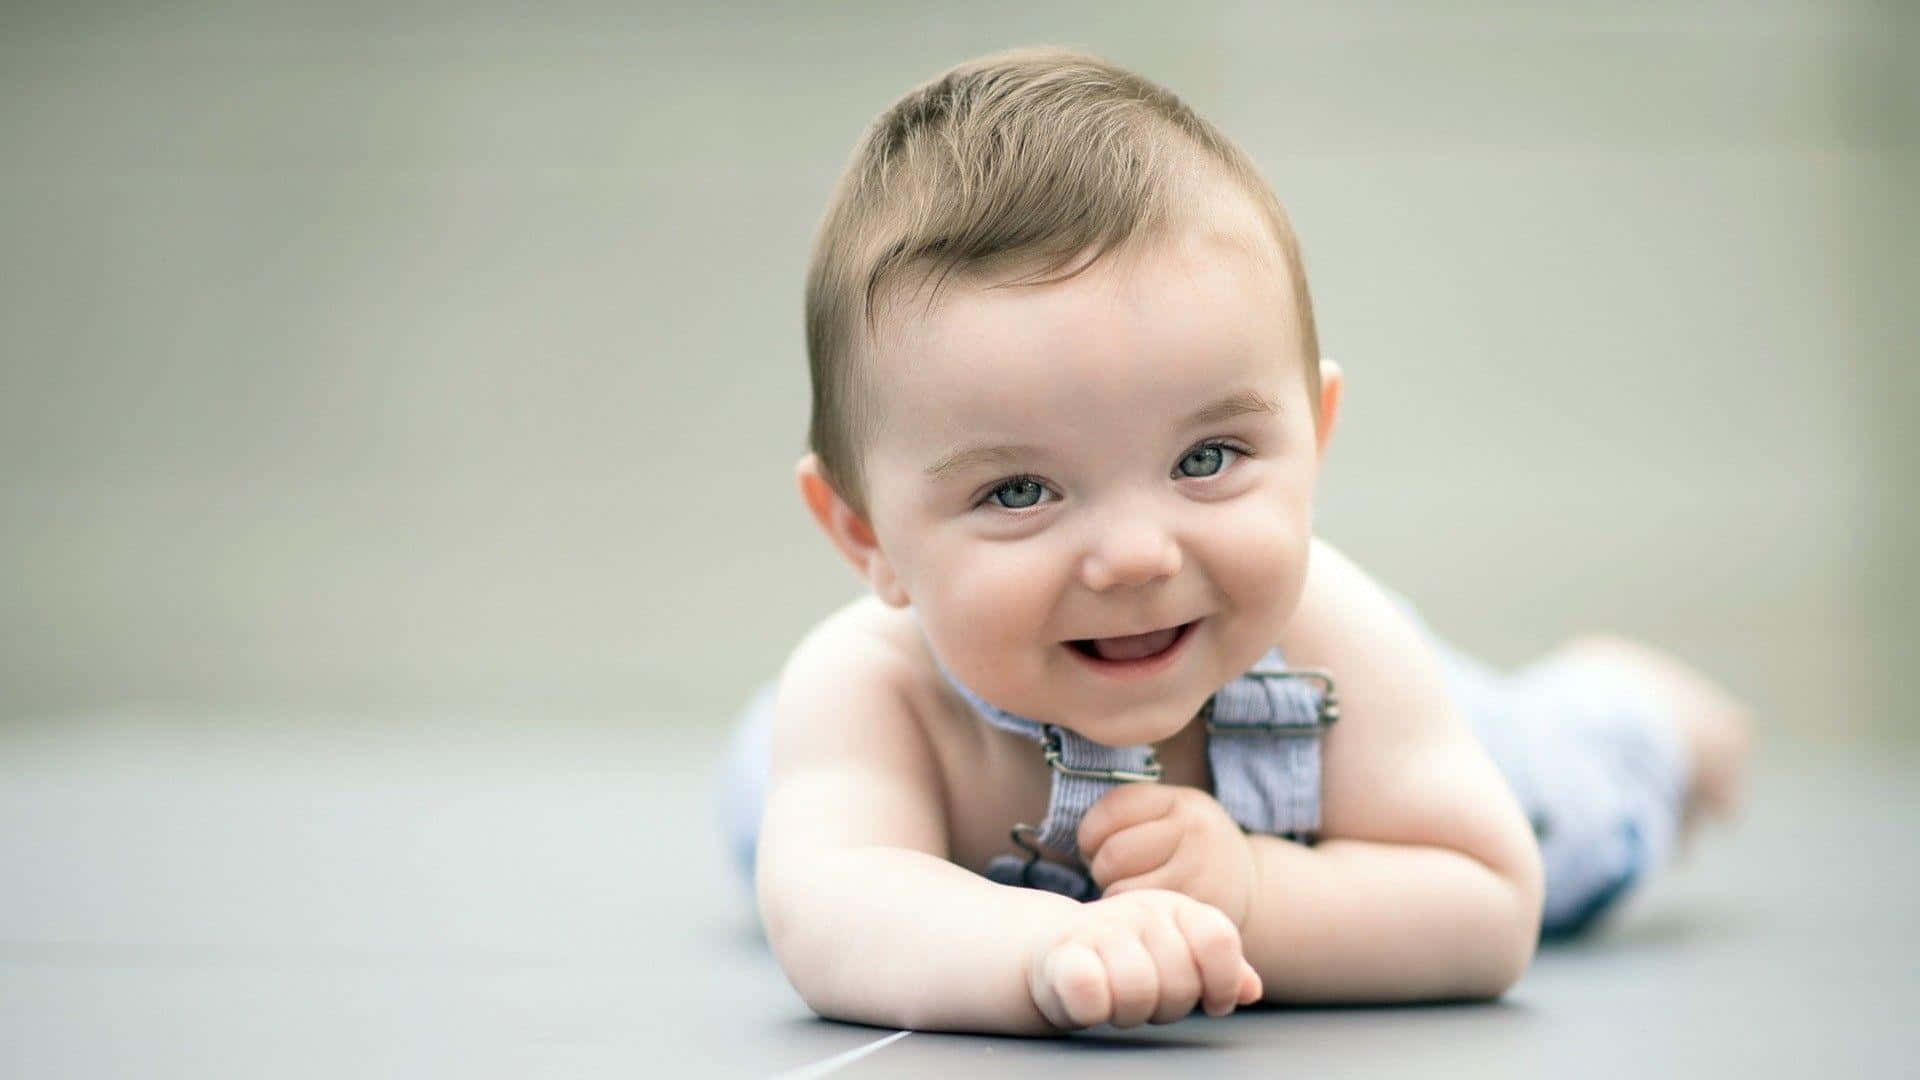 "cherubic Delight: An Adorable Baby Smiling In Pure Joy"